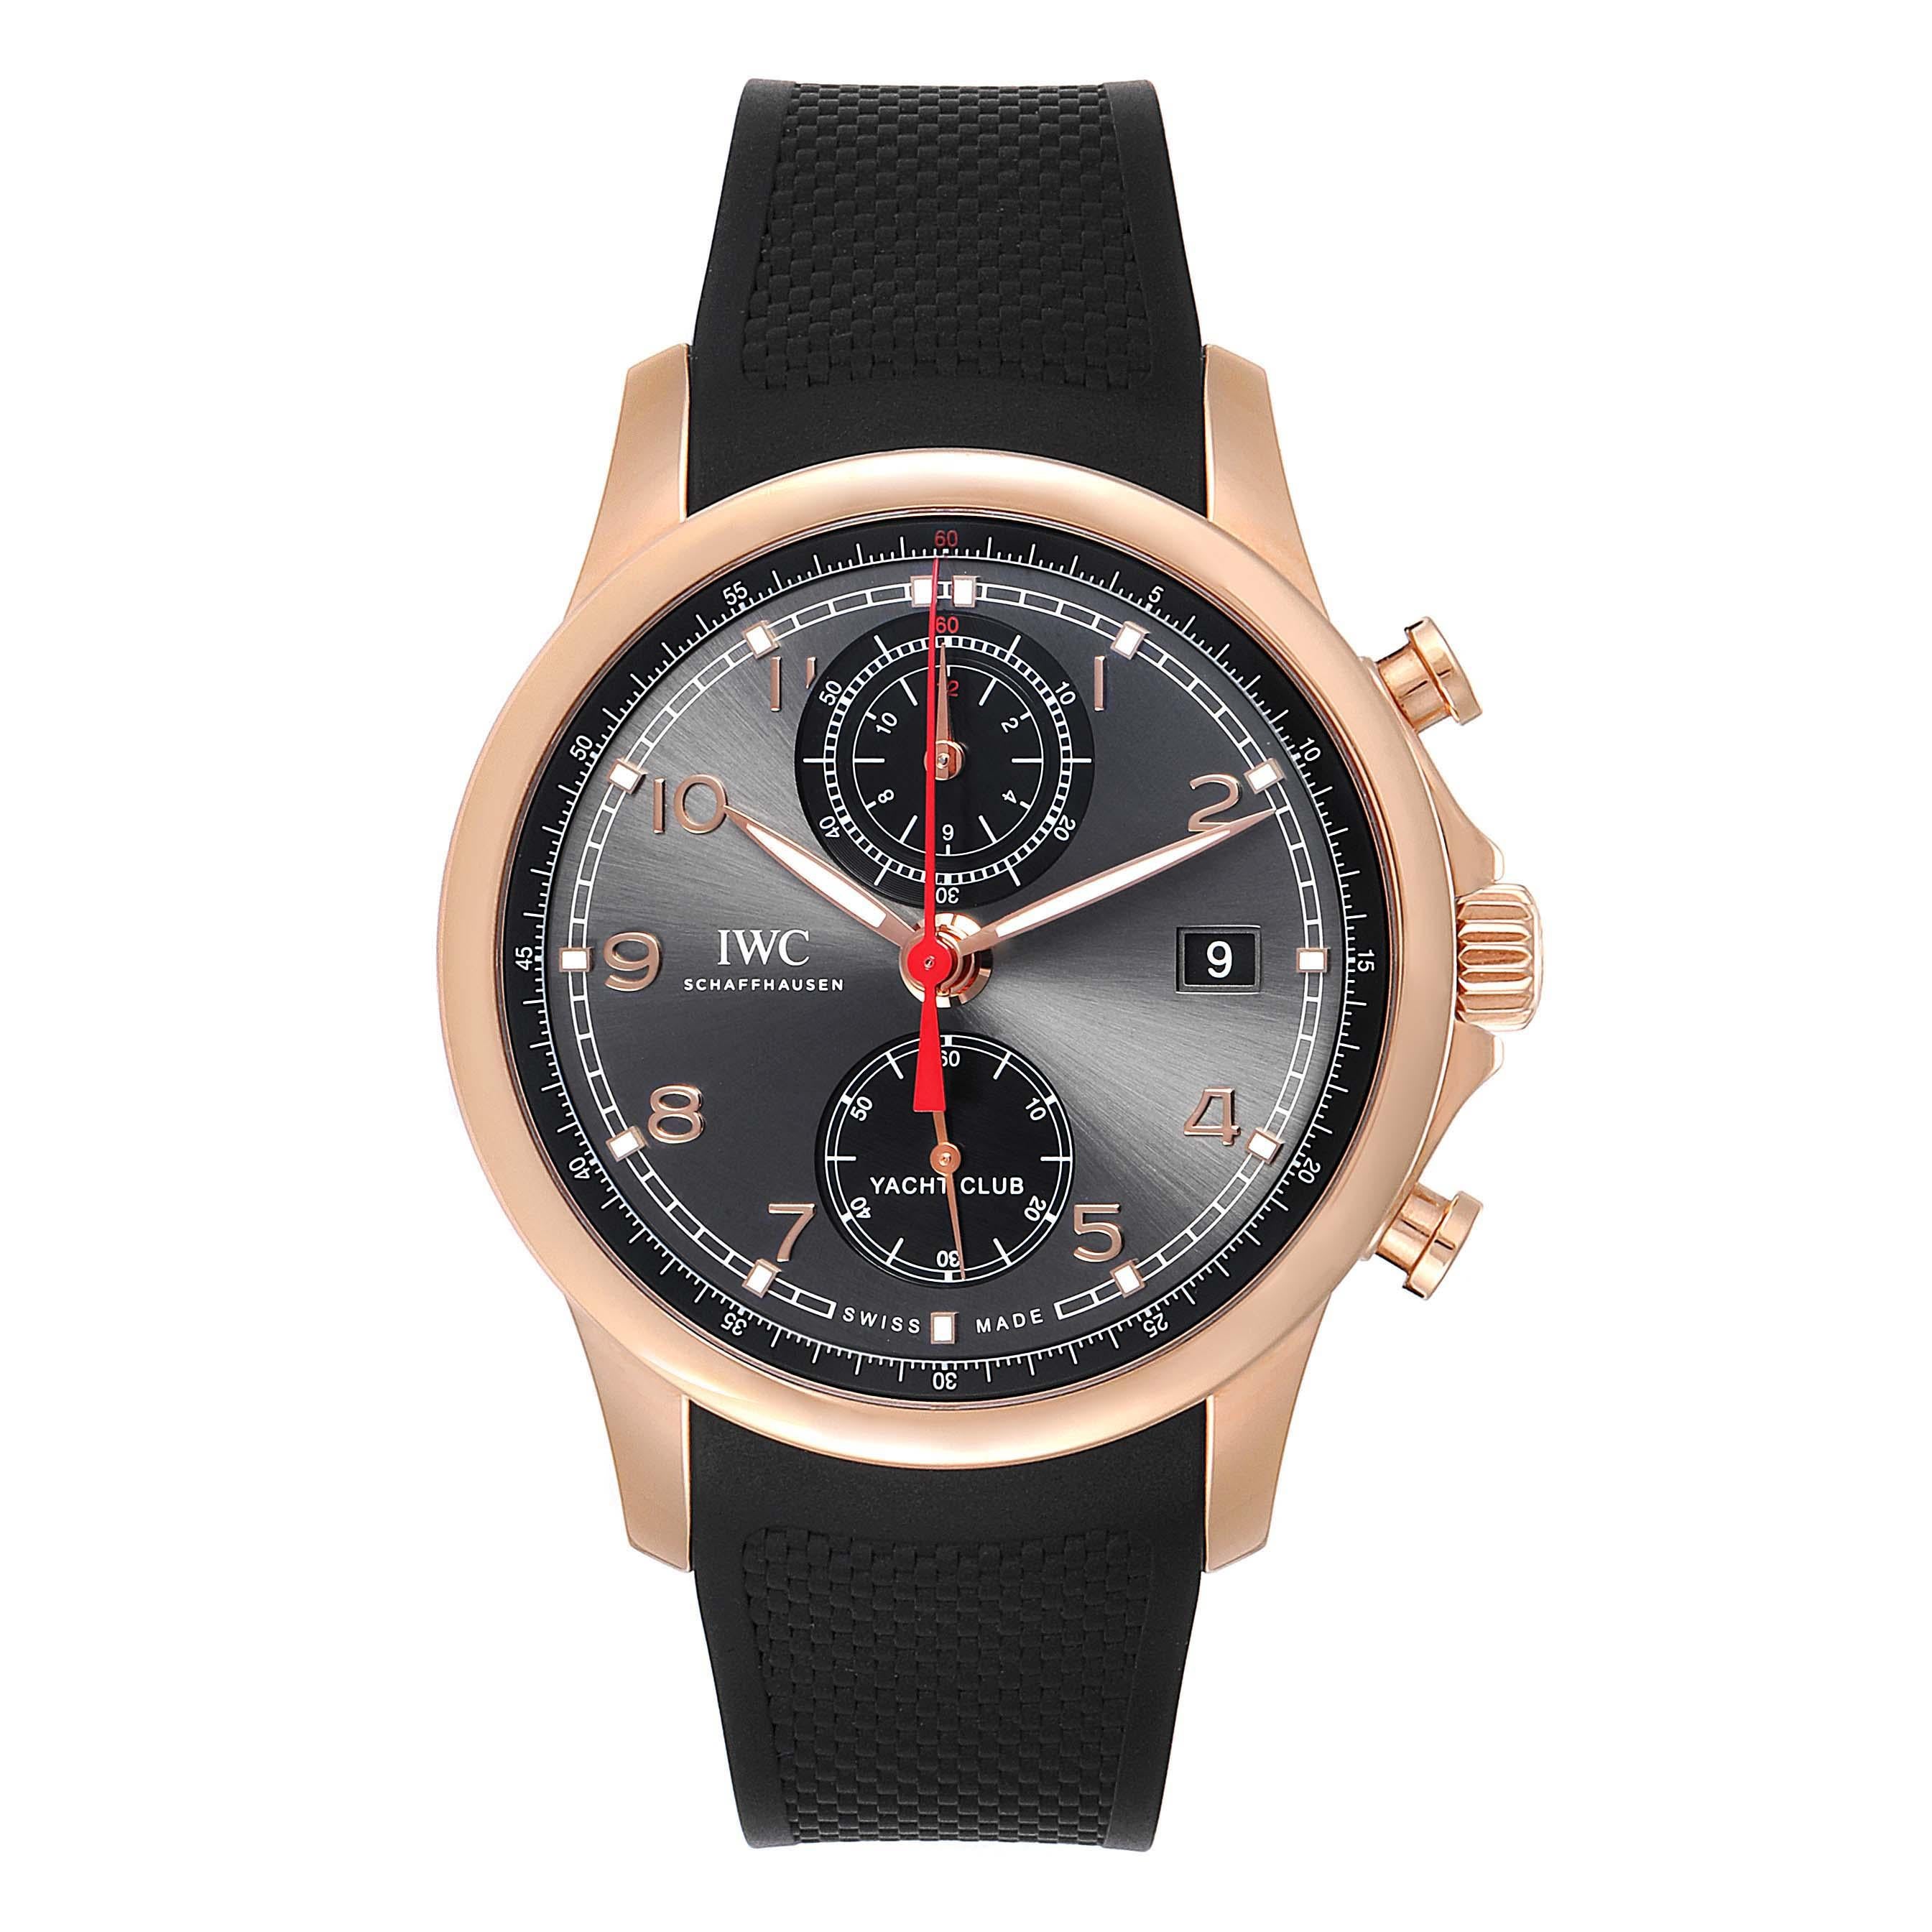 IWC Portuguese Yacht Club Rose Gold Chronograph Watch IW390209 Box Papers. Automatic self-winding movement with 68 hour power reserve. 18K rose gold case 45.4 mm in diameter. Exhibition sapphire crystal case back. 18K Rose gold bezel. Scratch